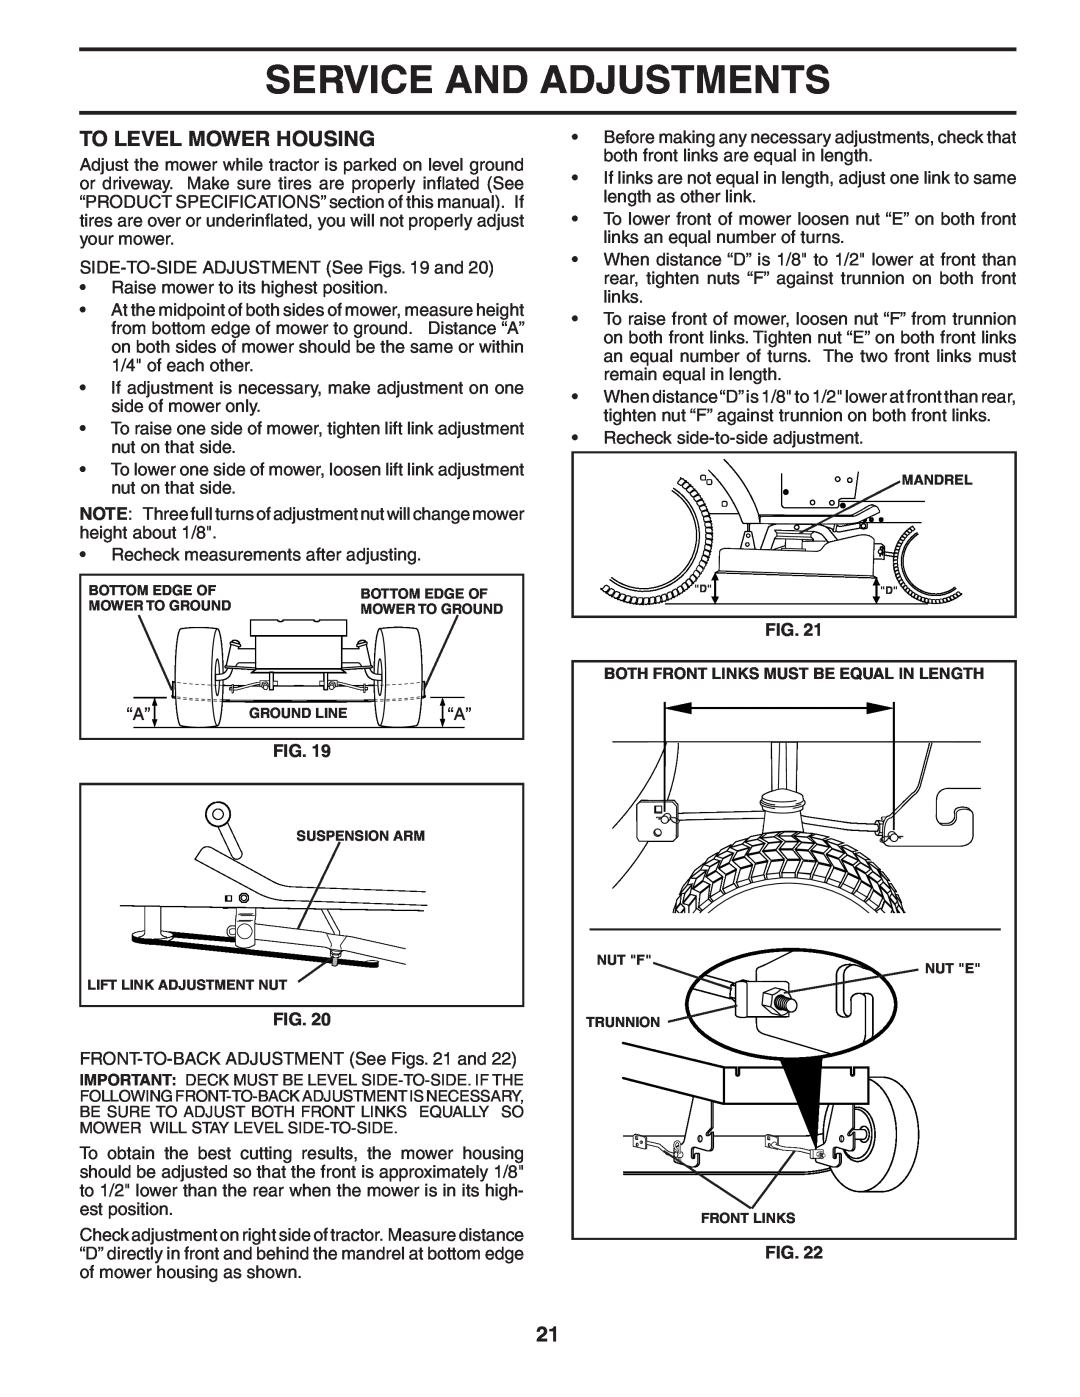 Poulan 184581 owner manual To Level Mower Housing, Service And Adjustments 